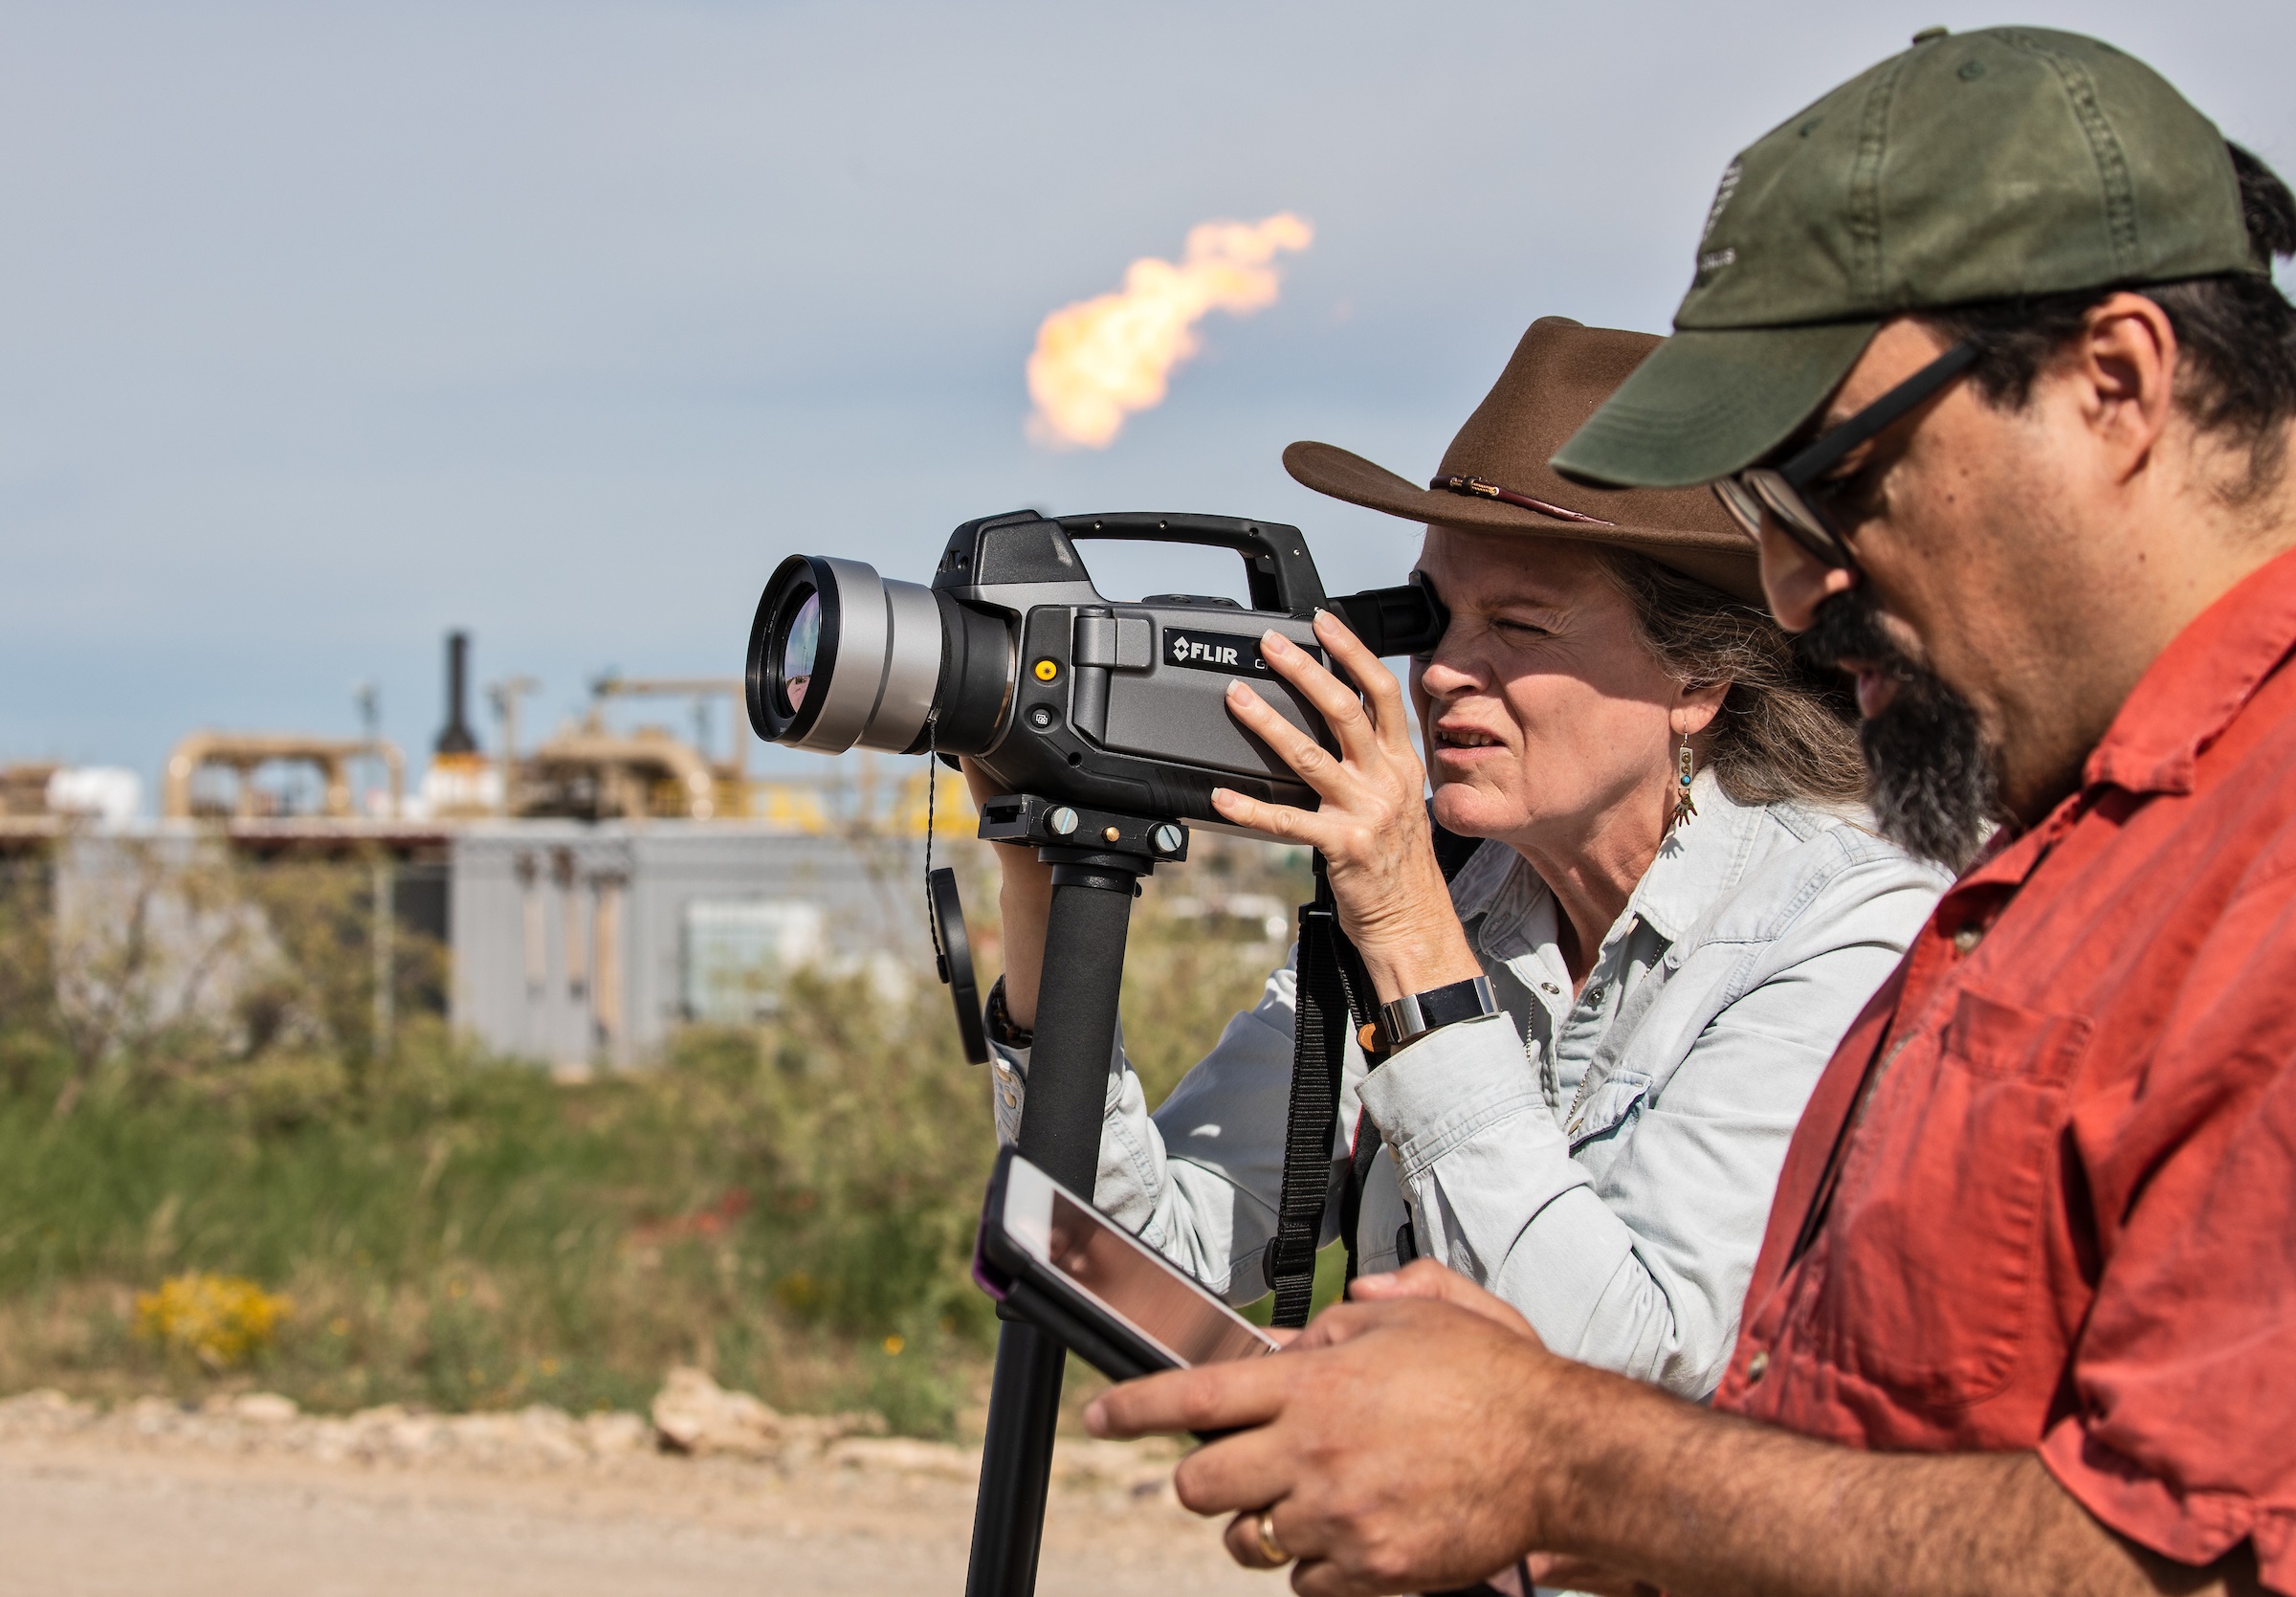 Sharon Wilson and Alan Septoff with Earthworks in the Permian Basin monitoring fracking industry sites, October 30, 2018